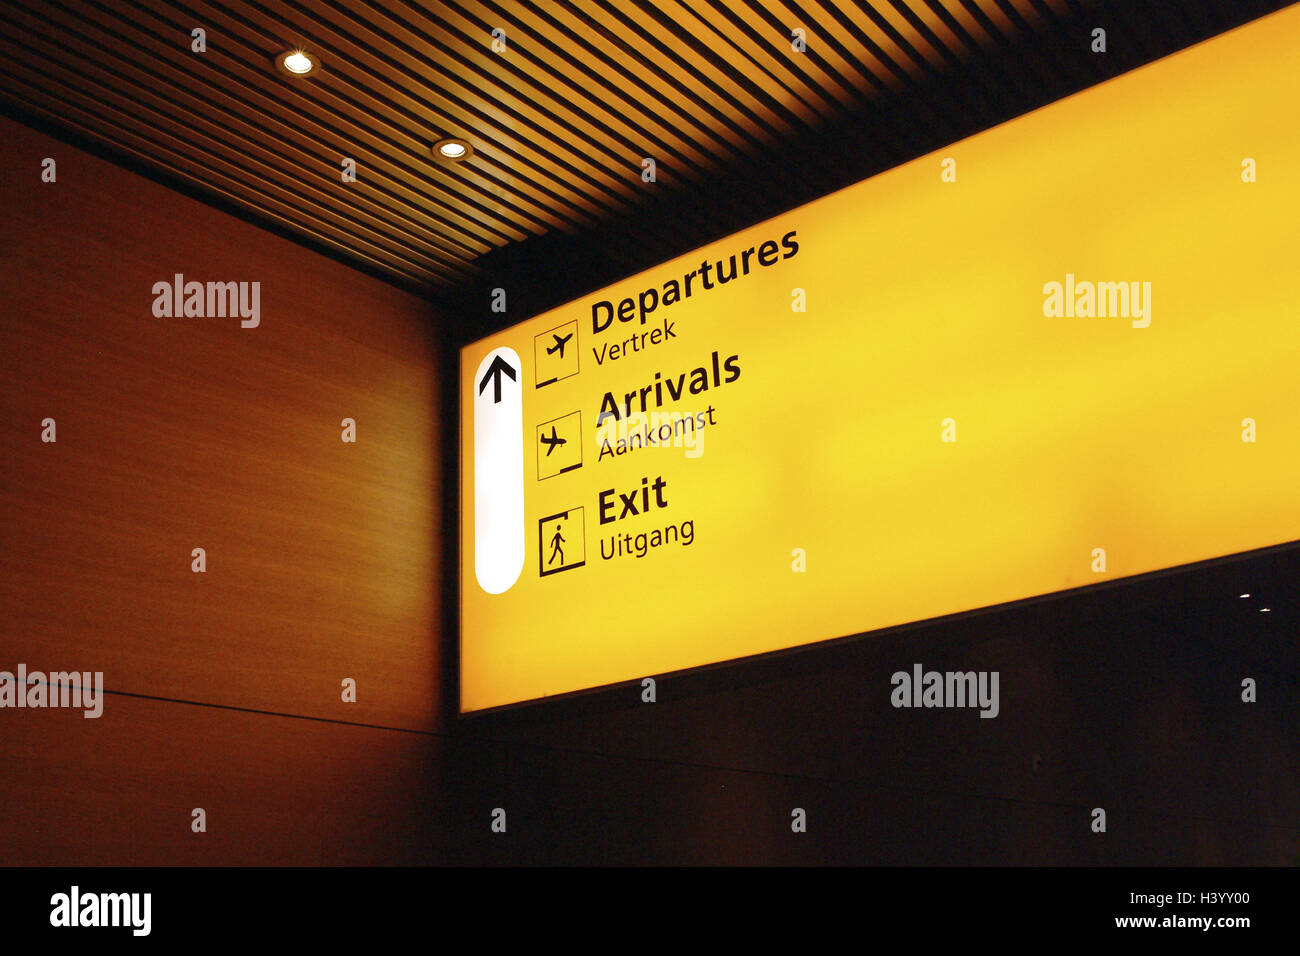 Airport, tip notice board, icons, lighting, Europe, the Netherlands, Amsterdam, Shiphol, signpost, sign, arrival, takeoff, exit, Departure, Arrivals, Exit, arrow, Still life, product photography Stock Photo